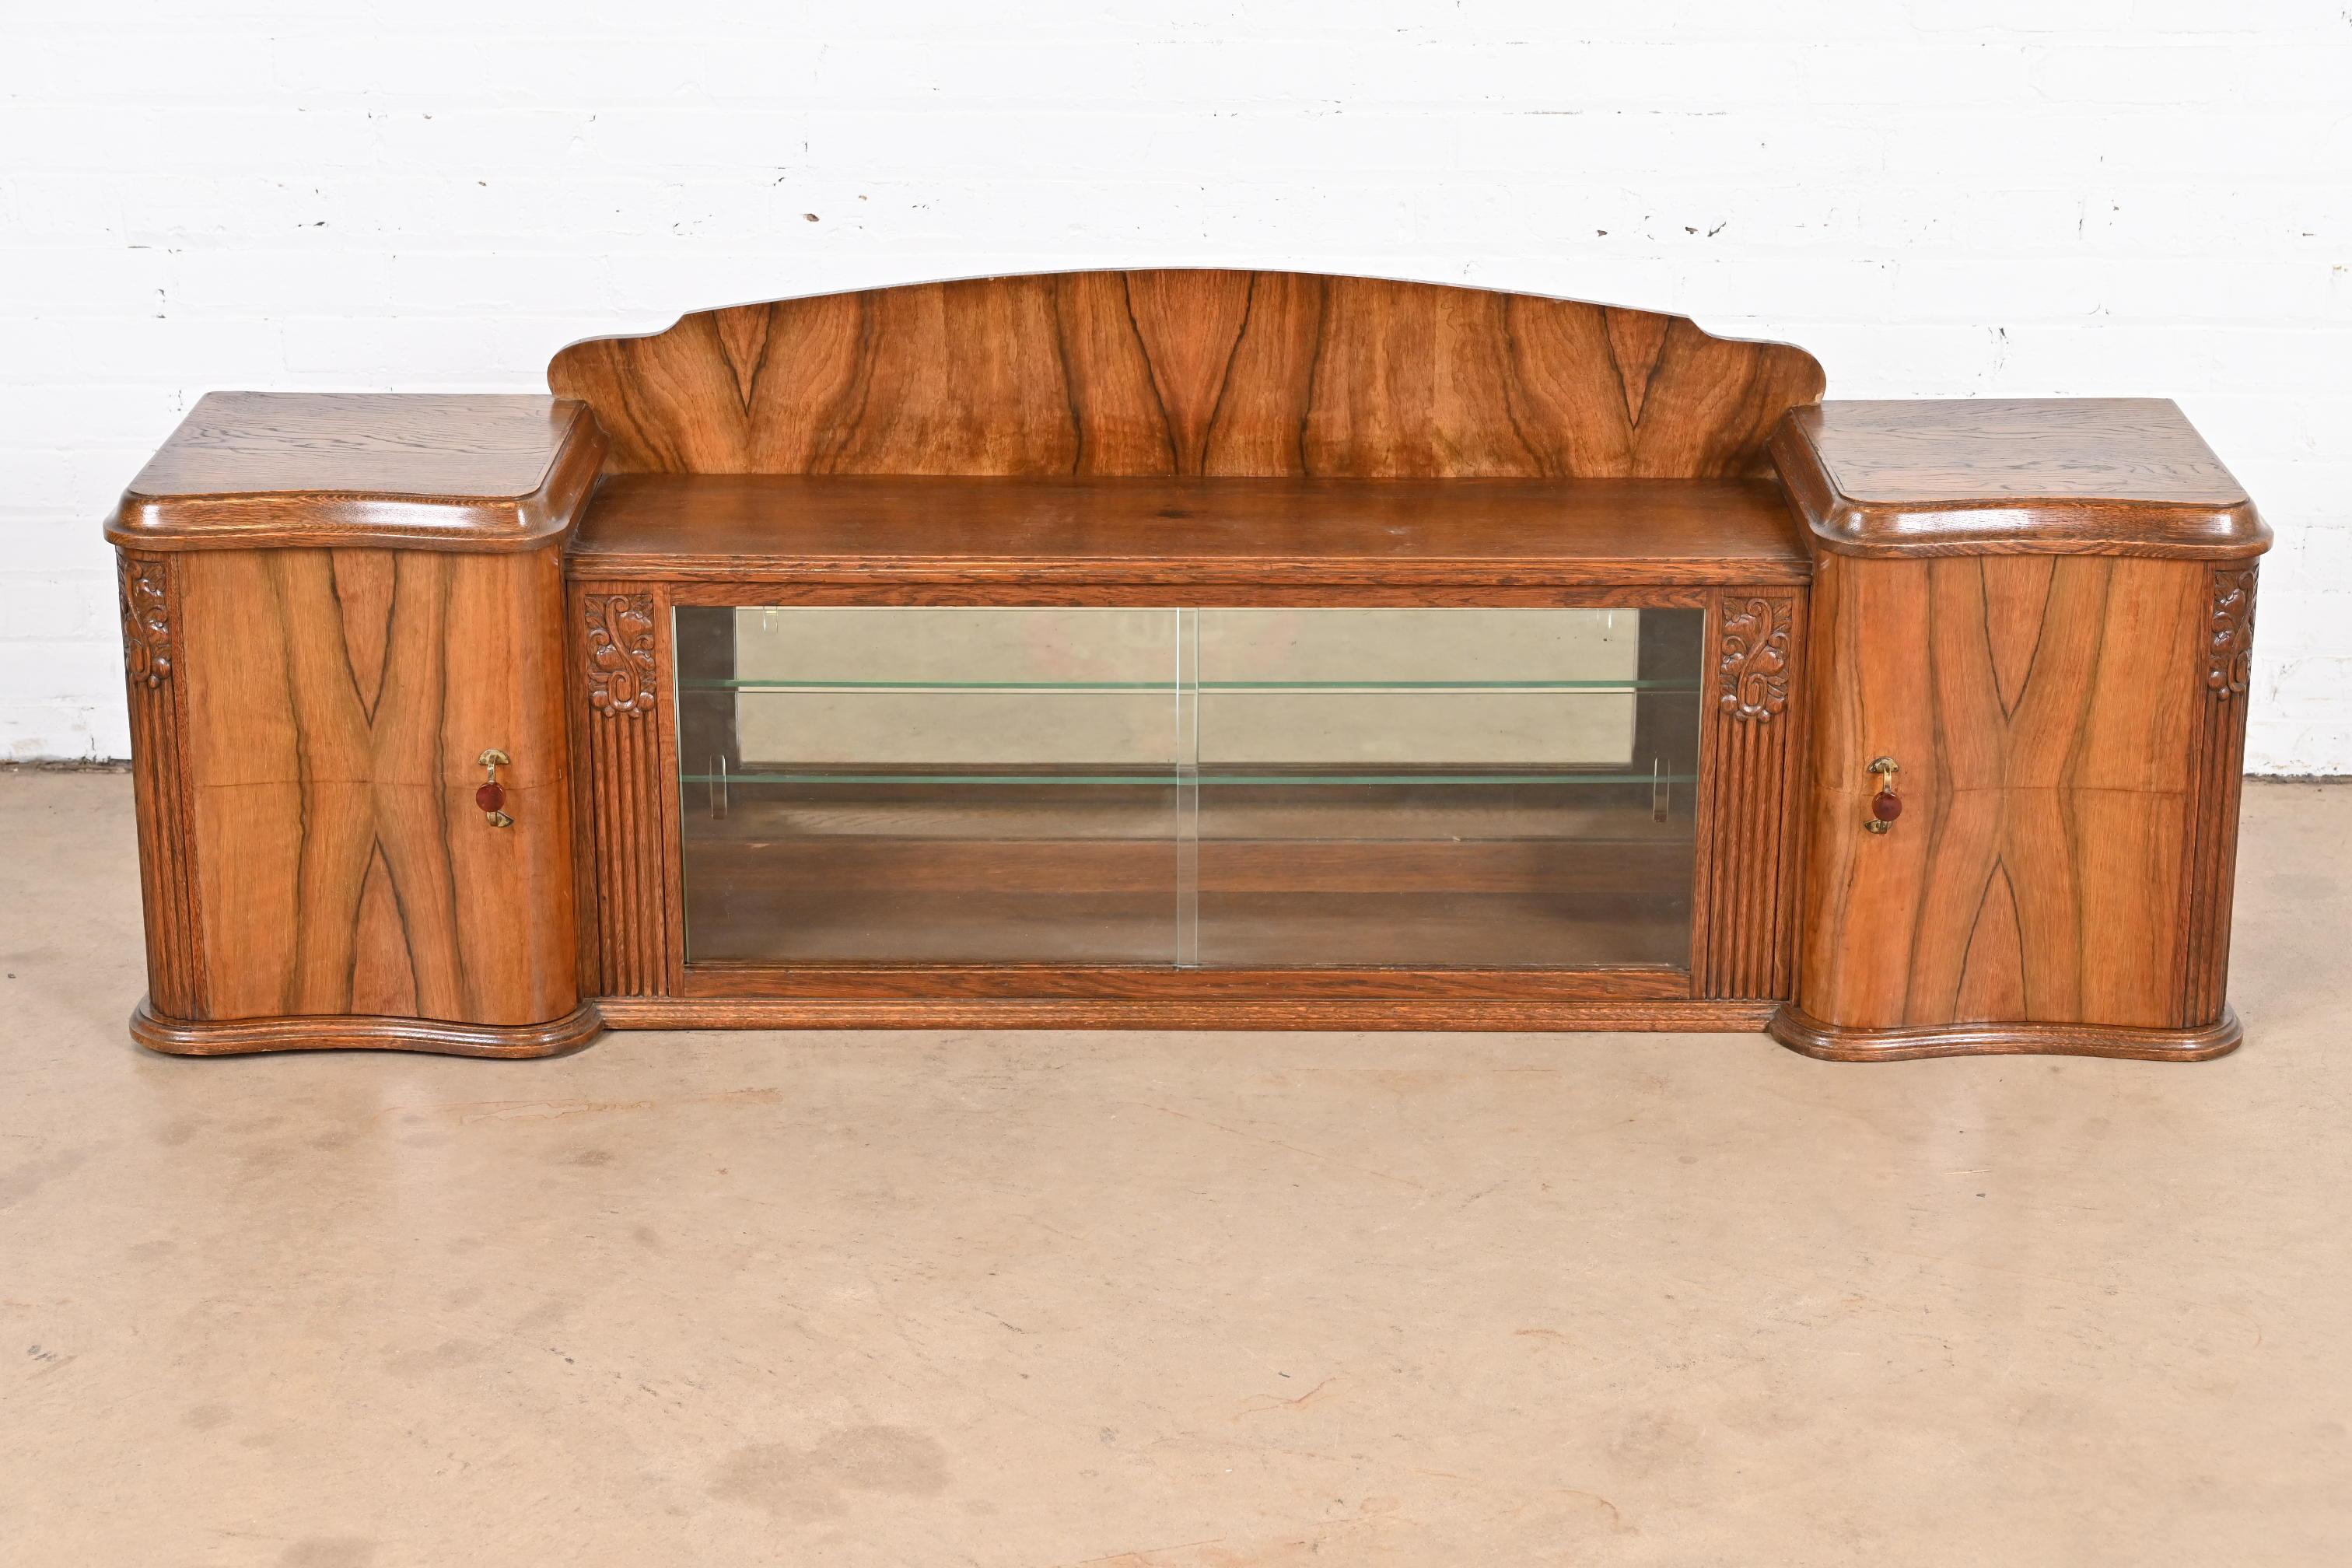 An outstanding French Art Deco table top display cabinet or bar cabinet

In the manner of Jules Leleu

France, circa 1930s

Carved oak, with gorgeous book-matched burled walnut front, original bakelite and brass hardware, sliding glass doors,